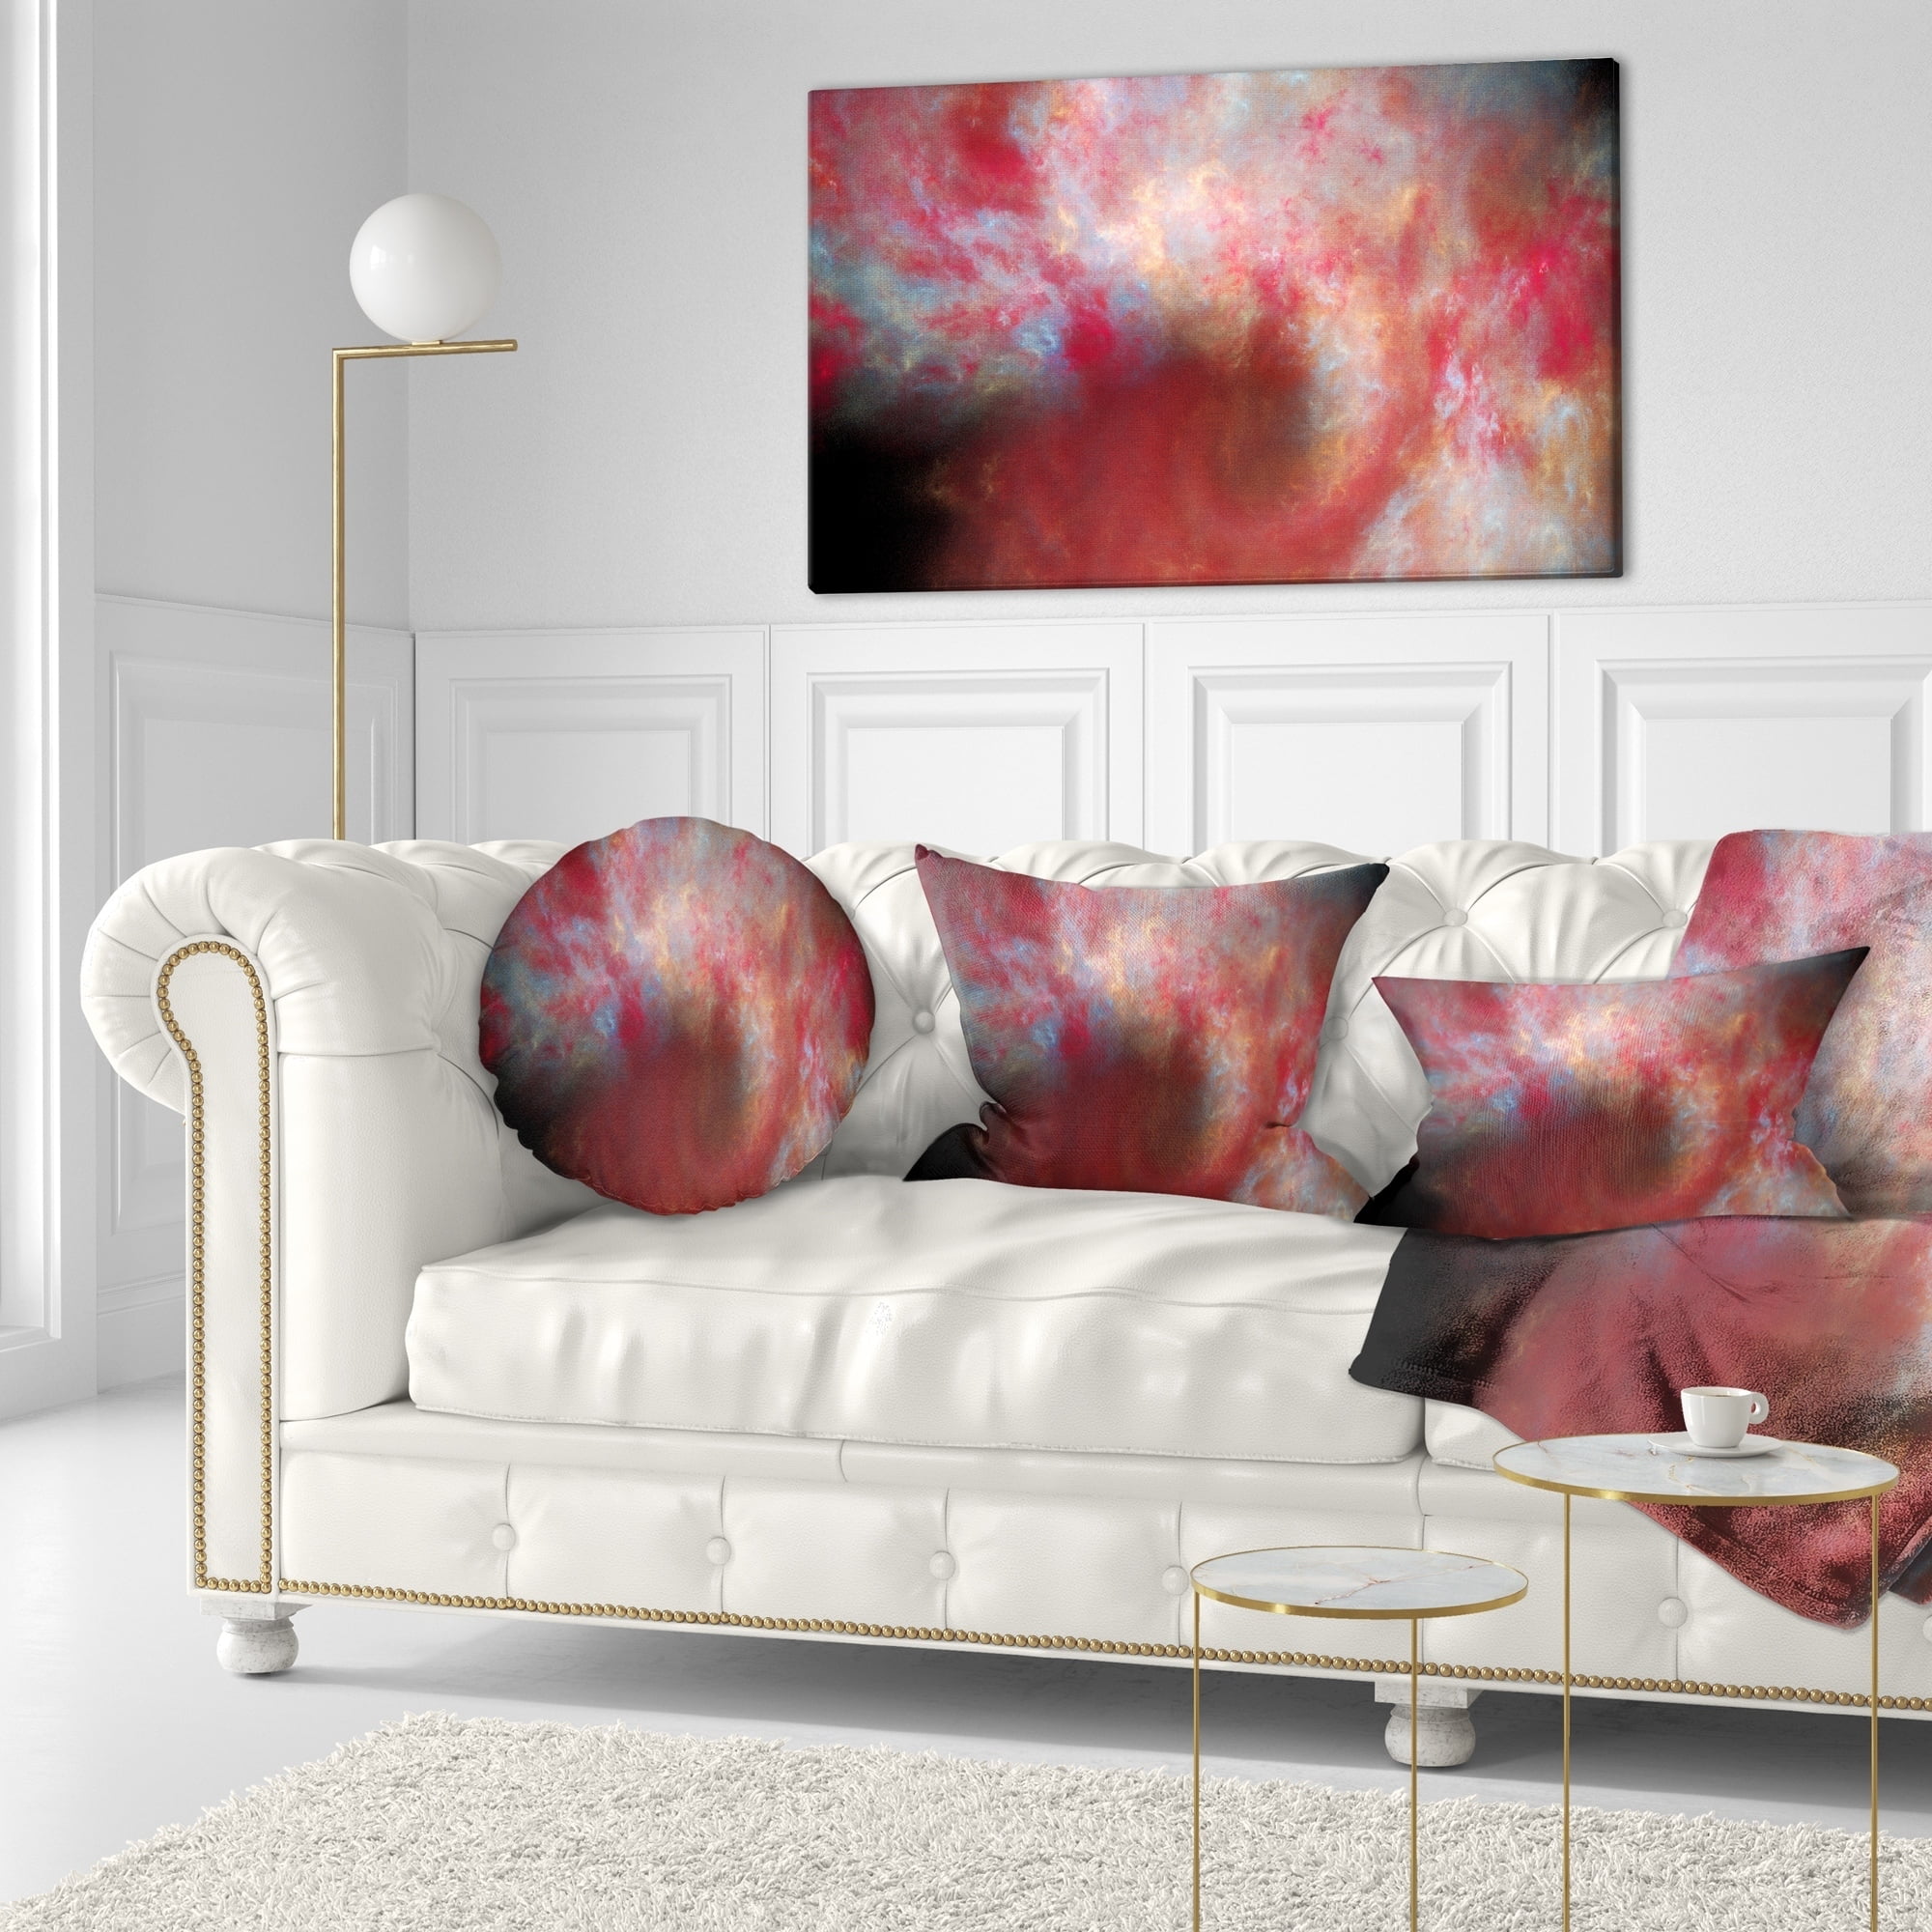 in x 26 in Sofa Throw Pillow 26 in Designart CU16364-26-26 Red Starry Fractal Sky Abstract Cushion Cover for Living Room 